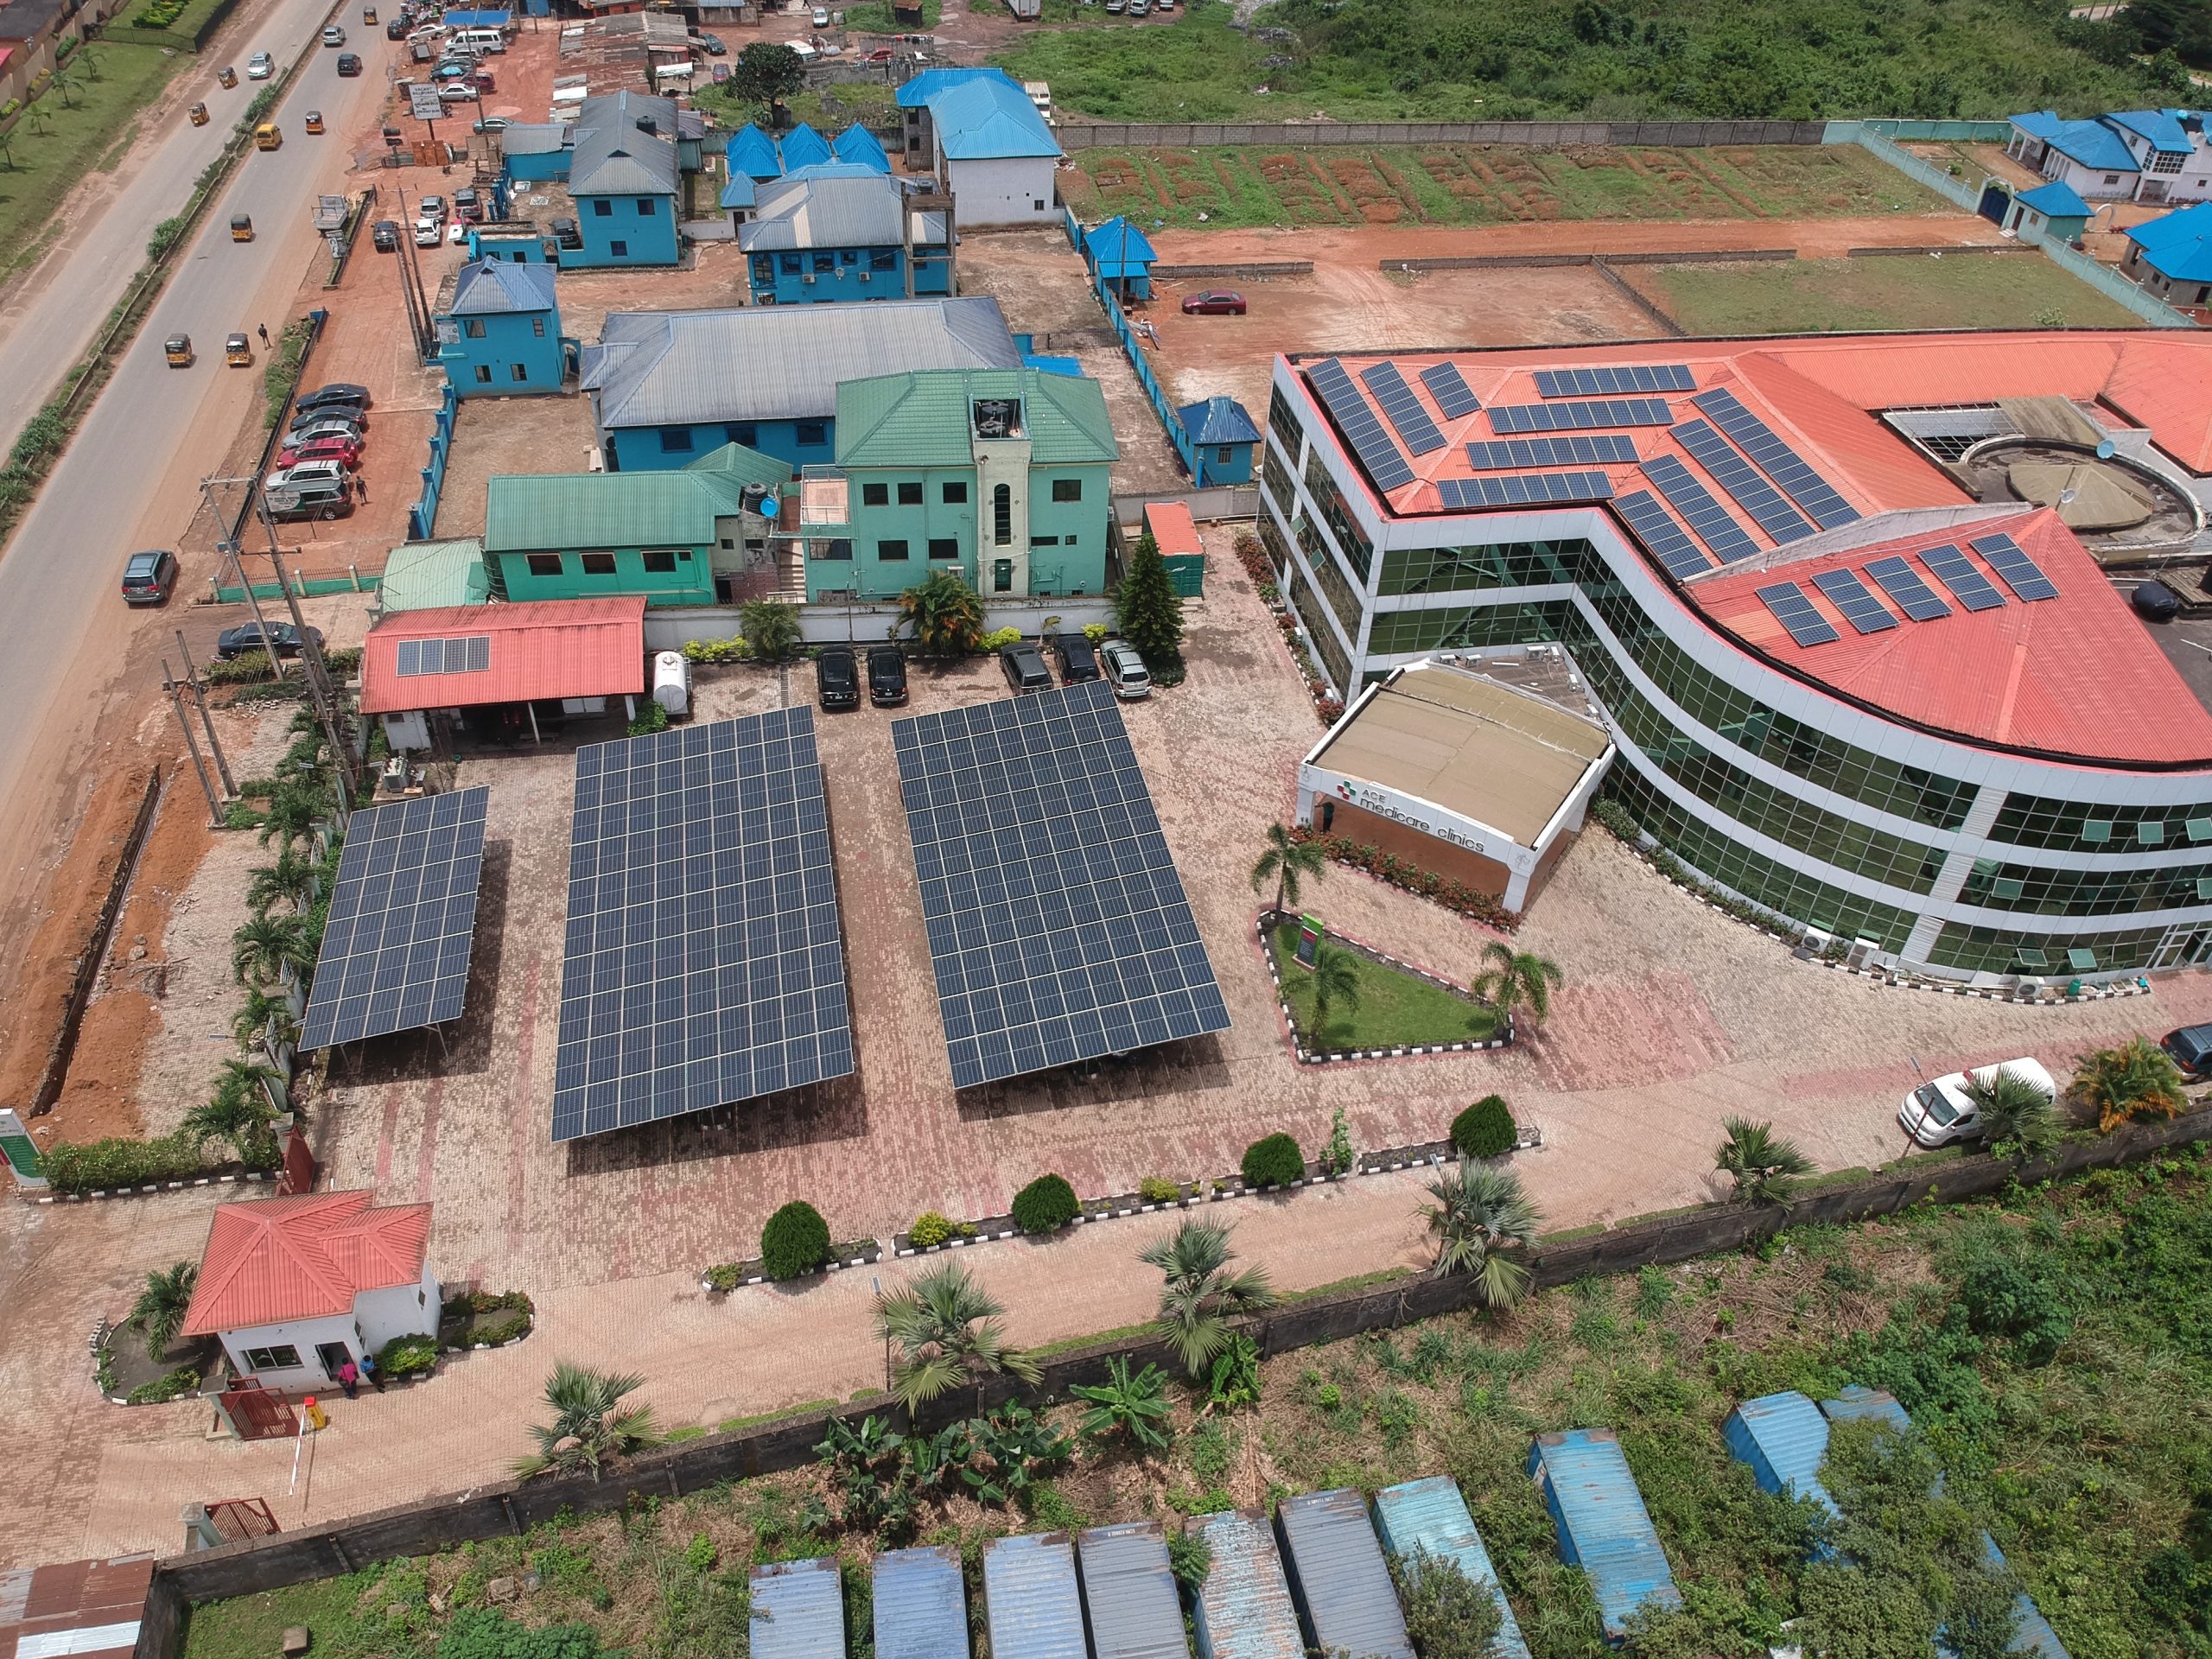 Arial image of a healthcare facility with solar panels